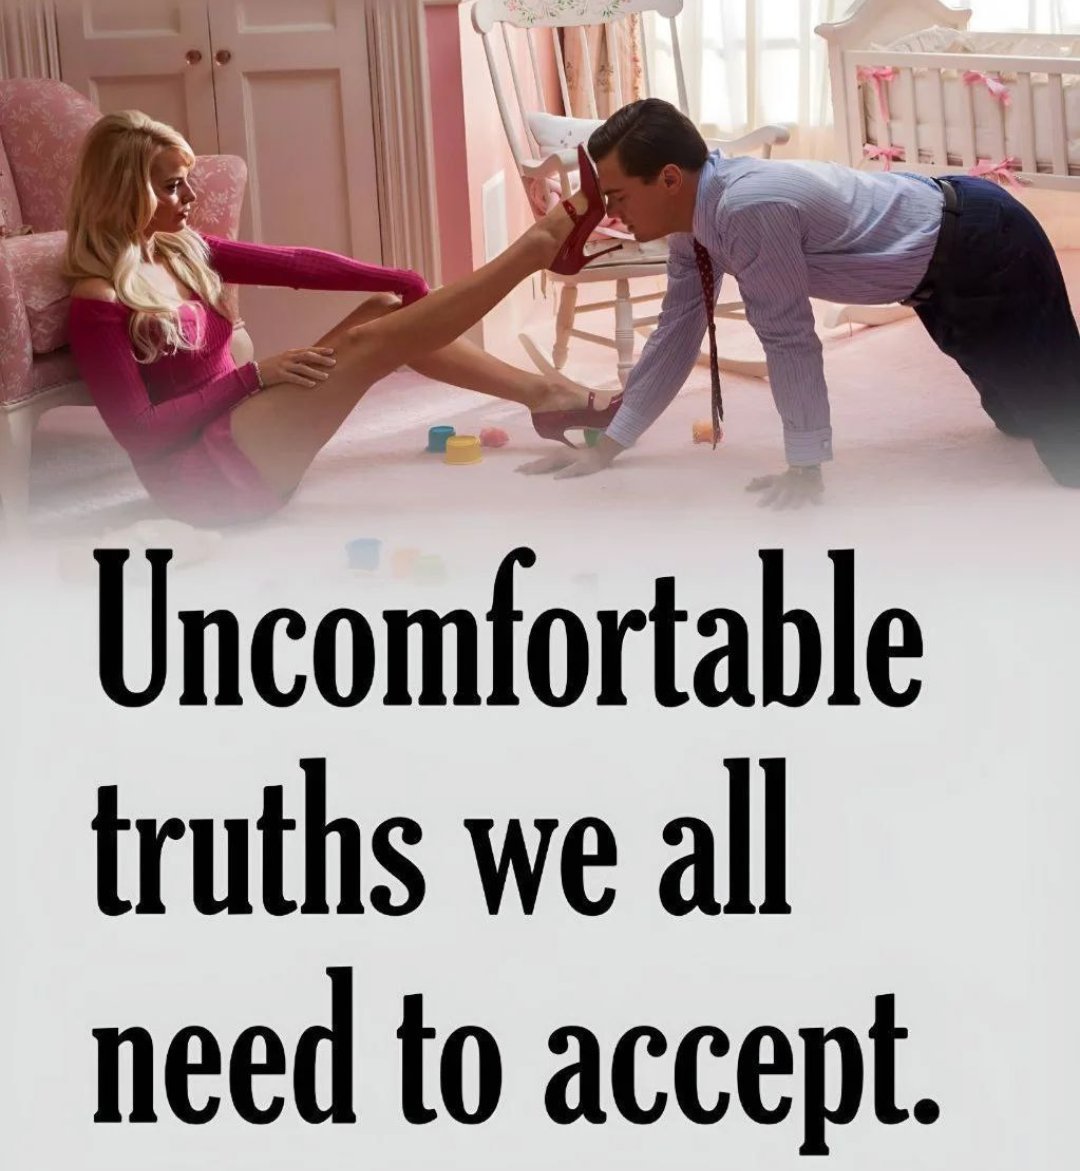 7 Uncomfortable Truths In Life: